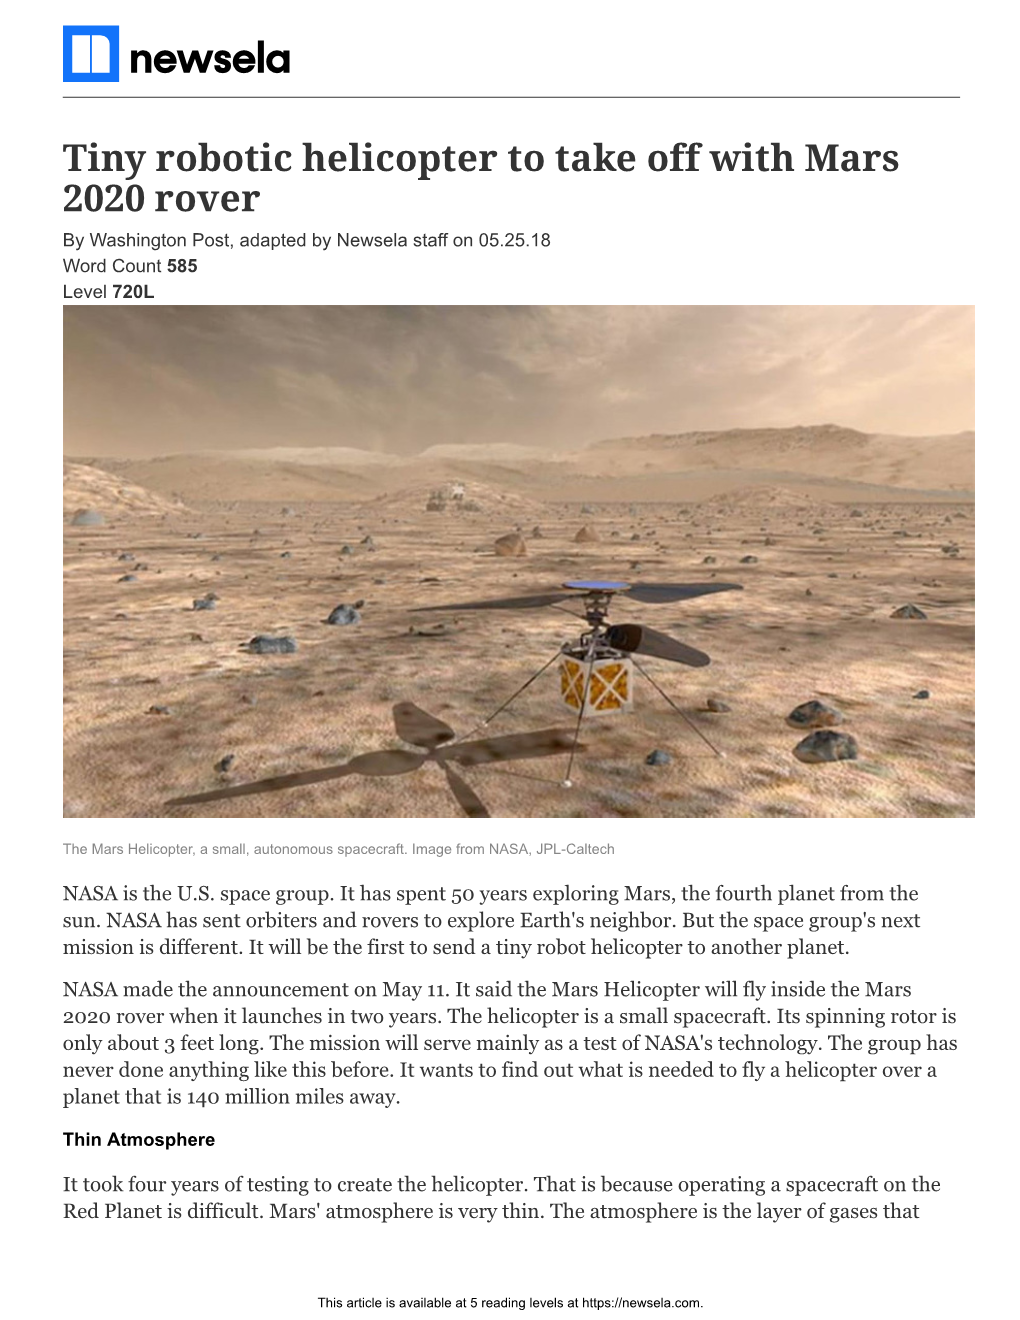 Tiny Robotic Helicopter to Take Off with Mars 2020 Rover by Washington Post, Adapted by Newsela Staff on 05.25.18 Word Count 585 Level 720L